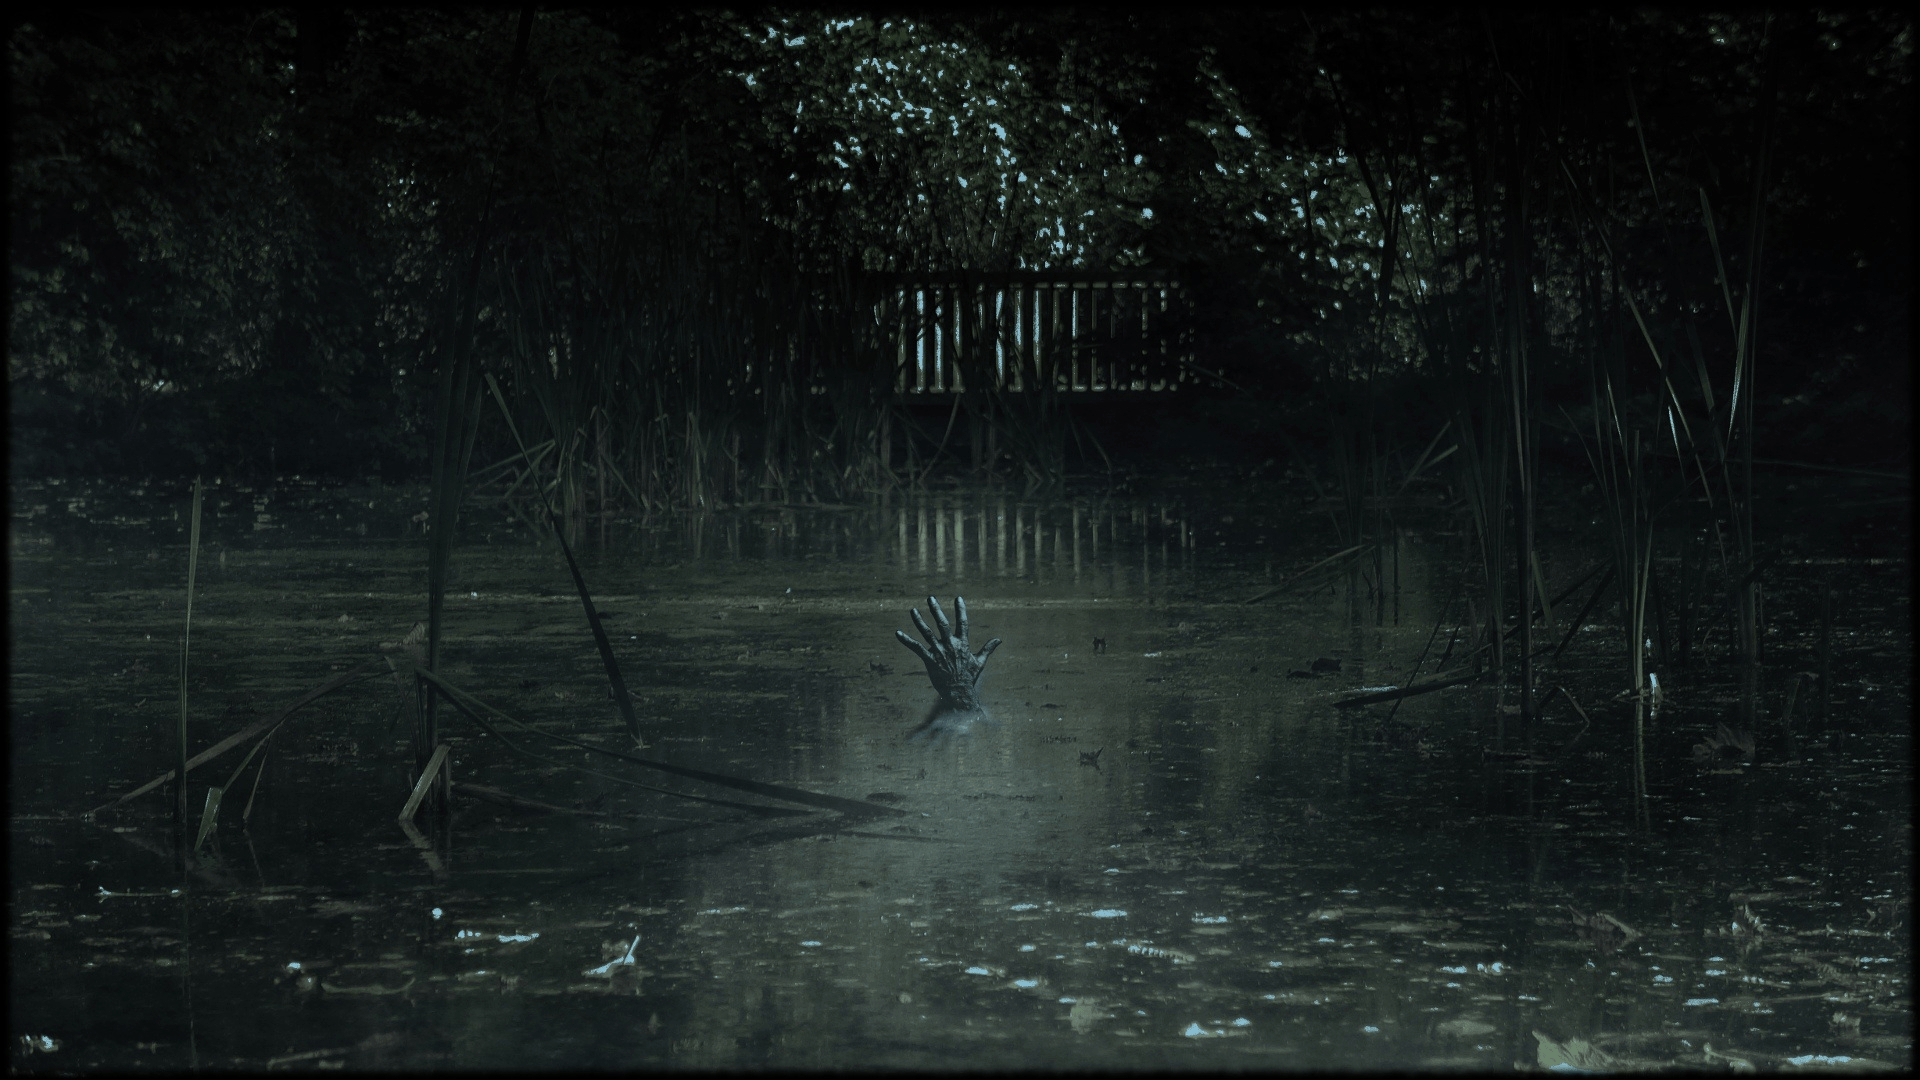 A dark hand emerges from a swamp